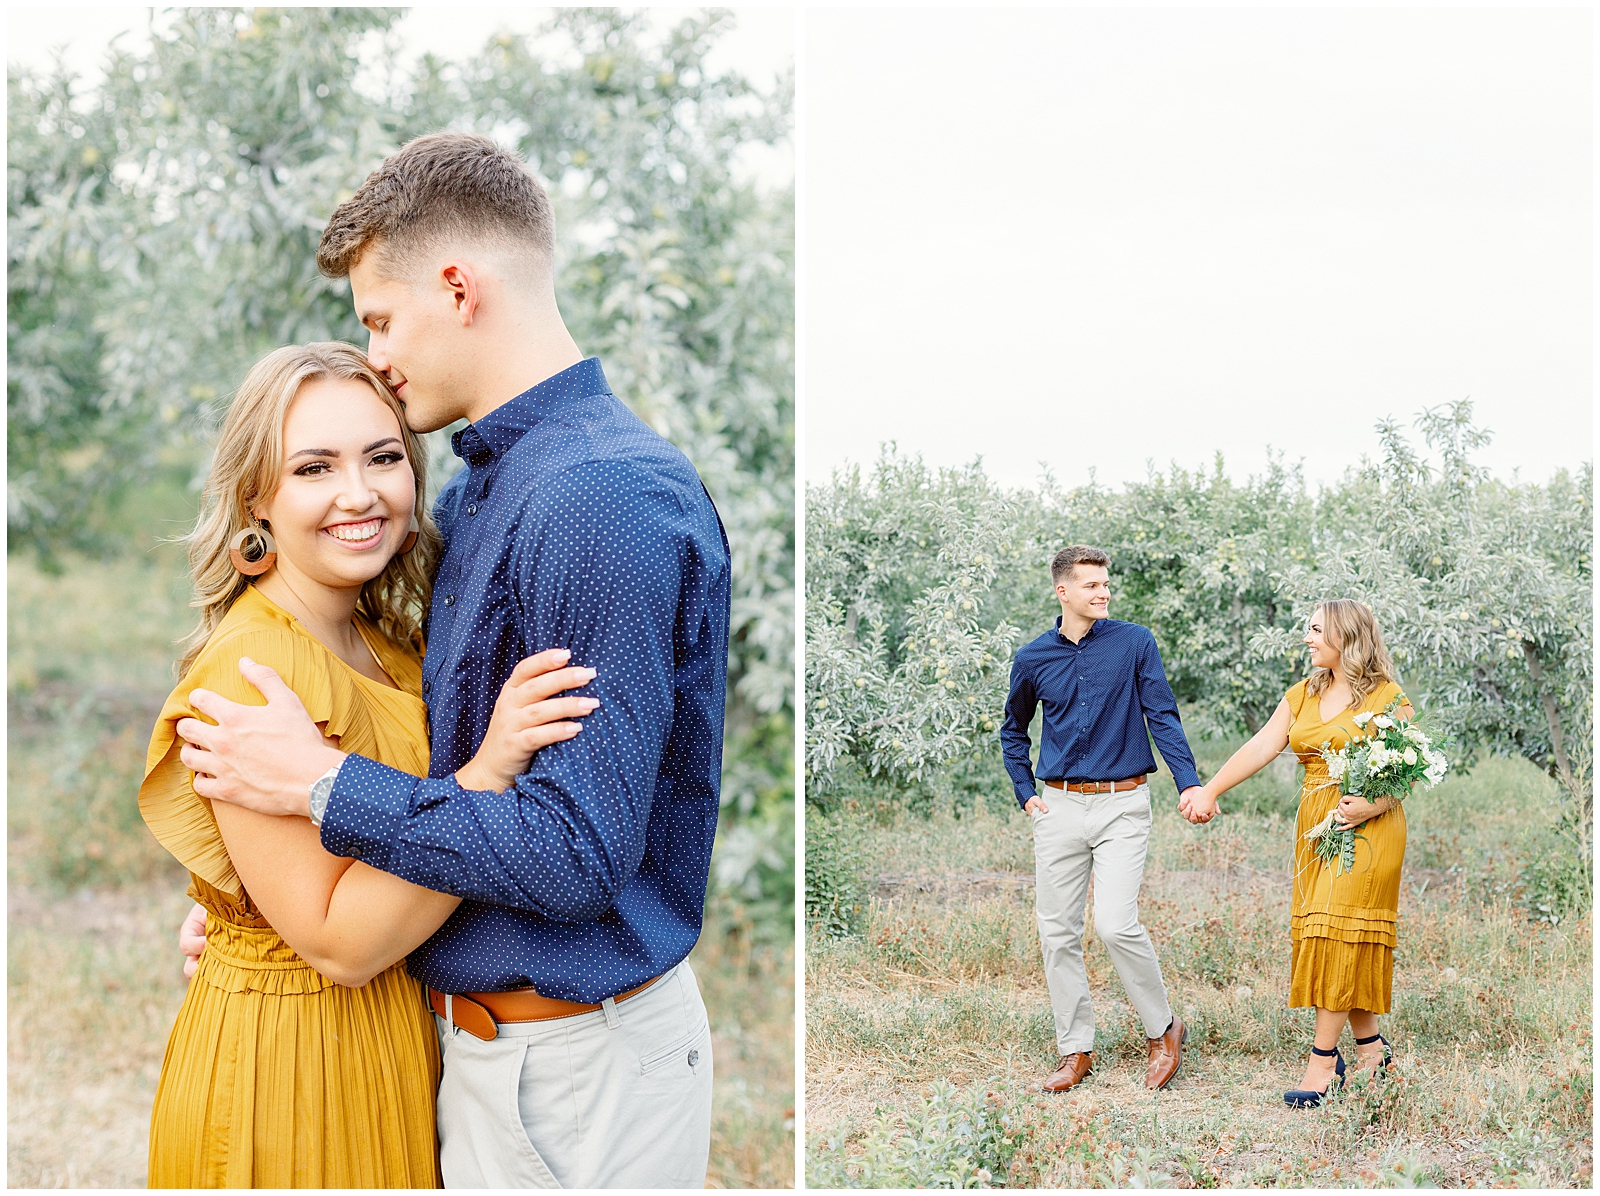 Summer Orchard Engagement Session in Boise Idaho